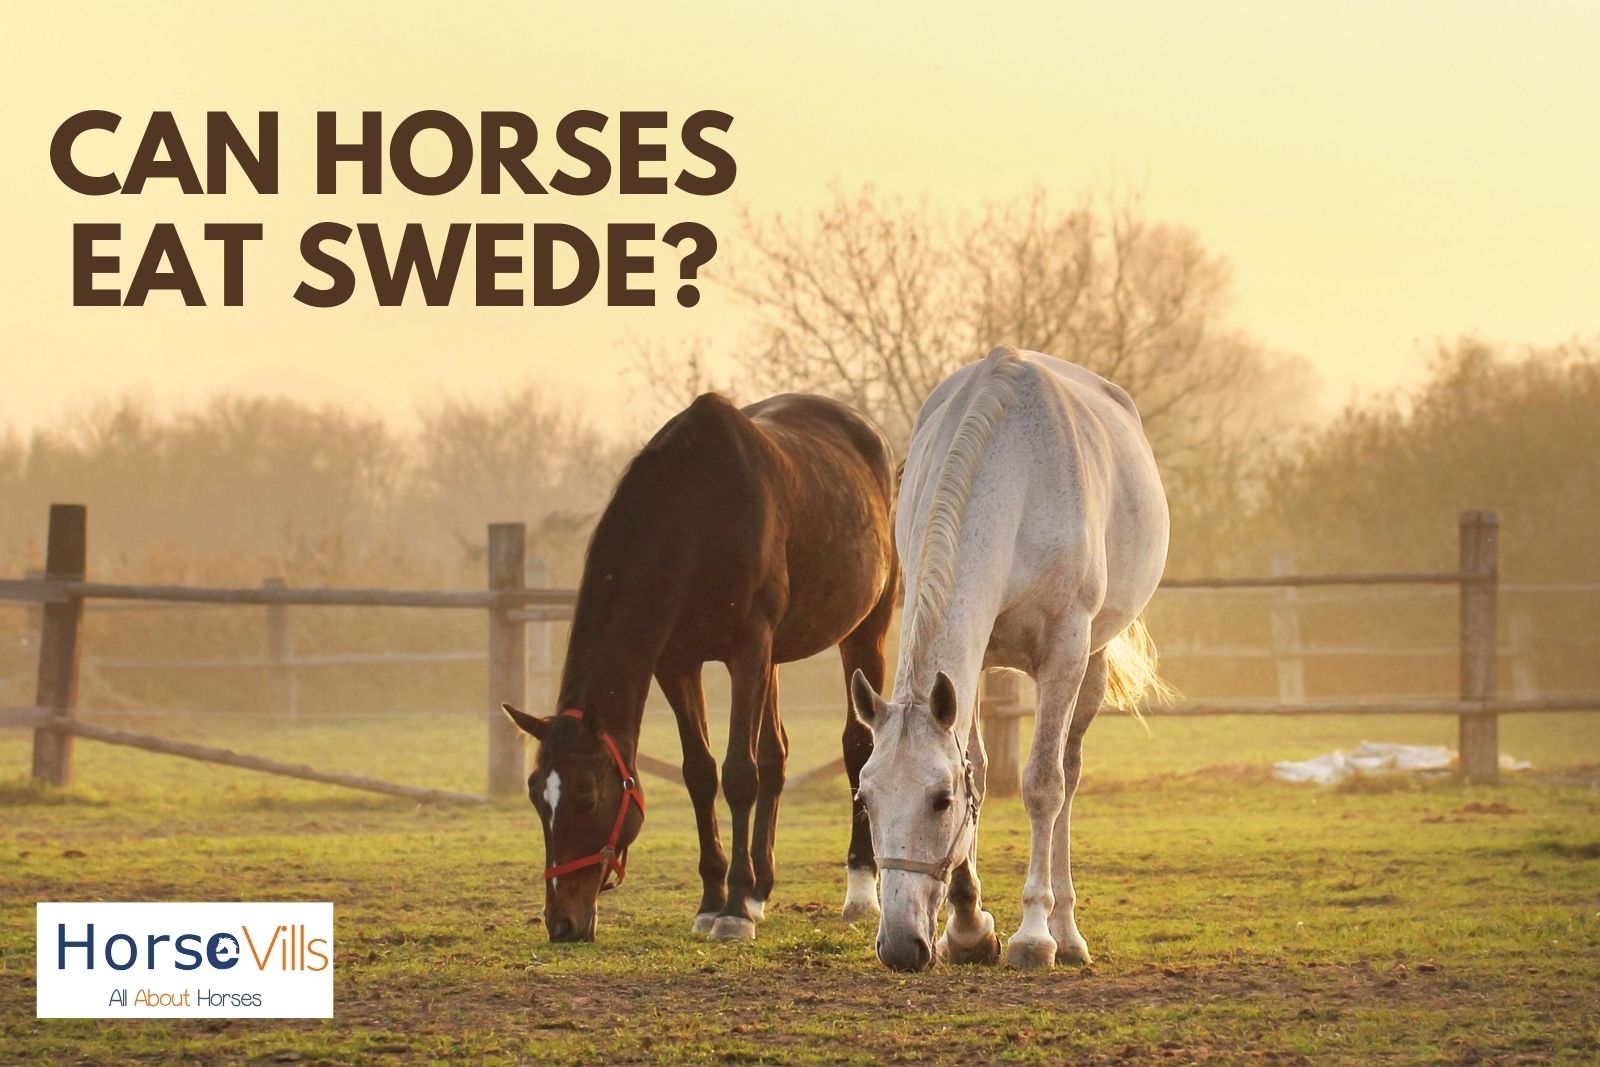 horses eating grasses. can horses eat swede instead?